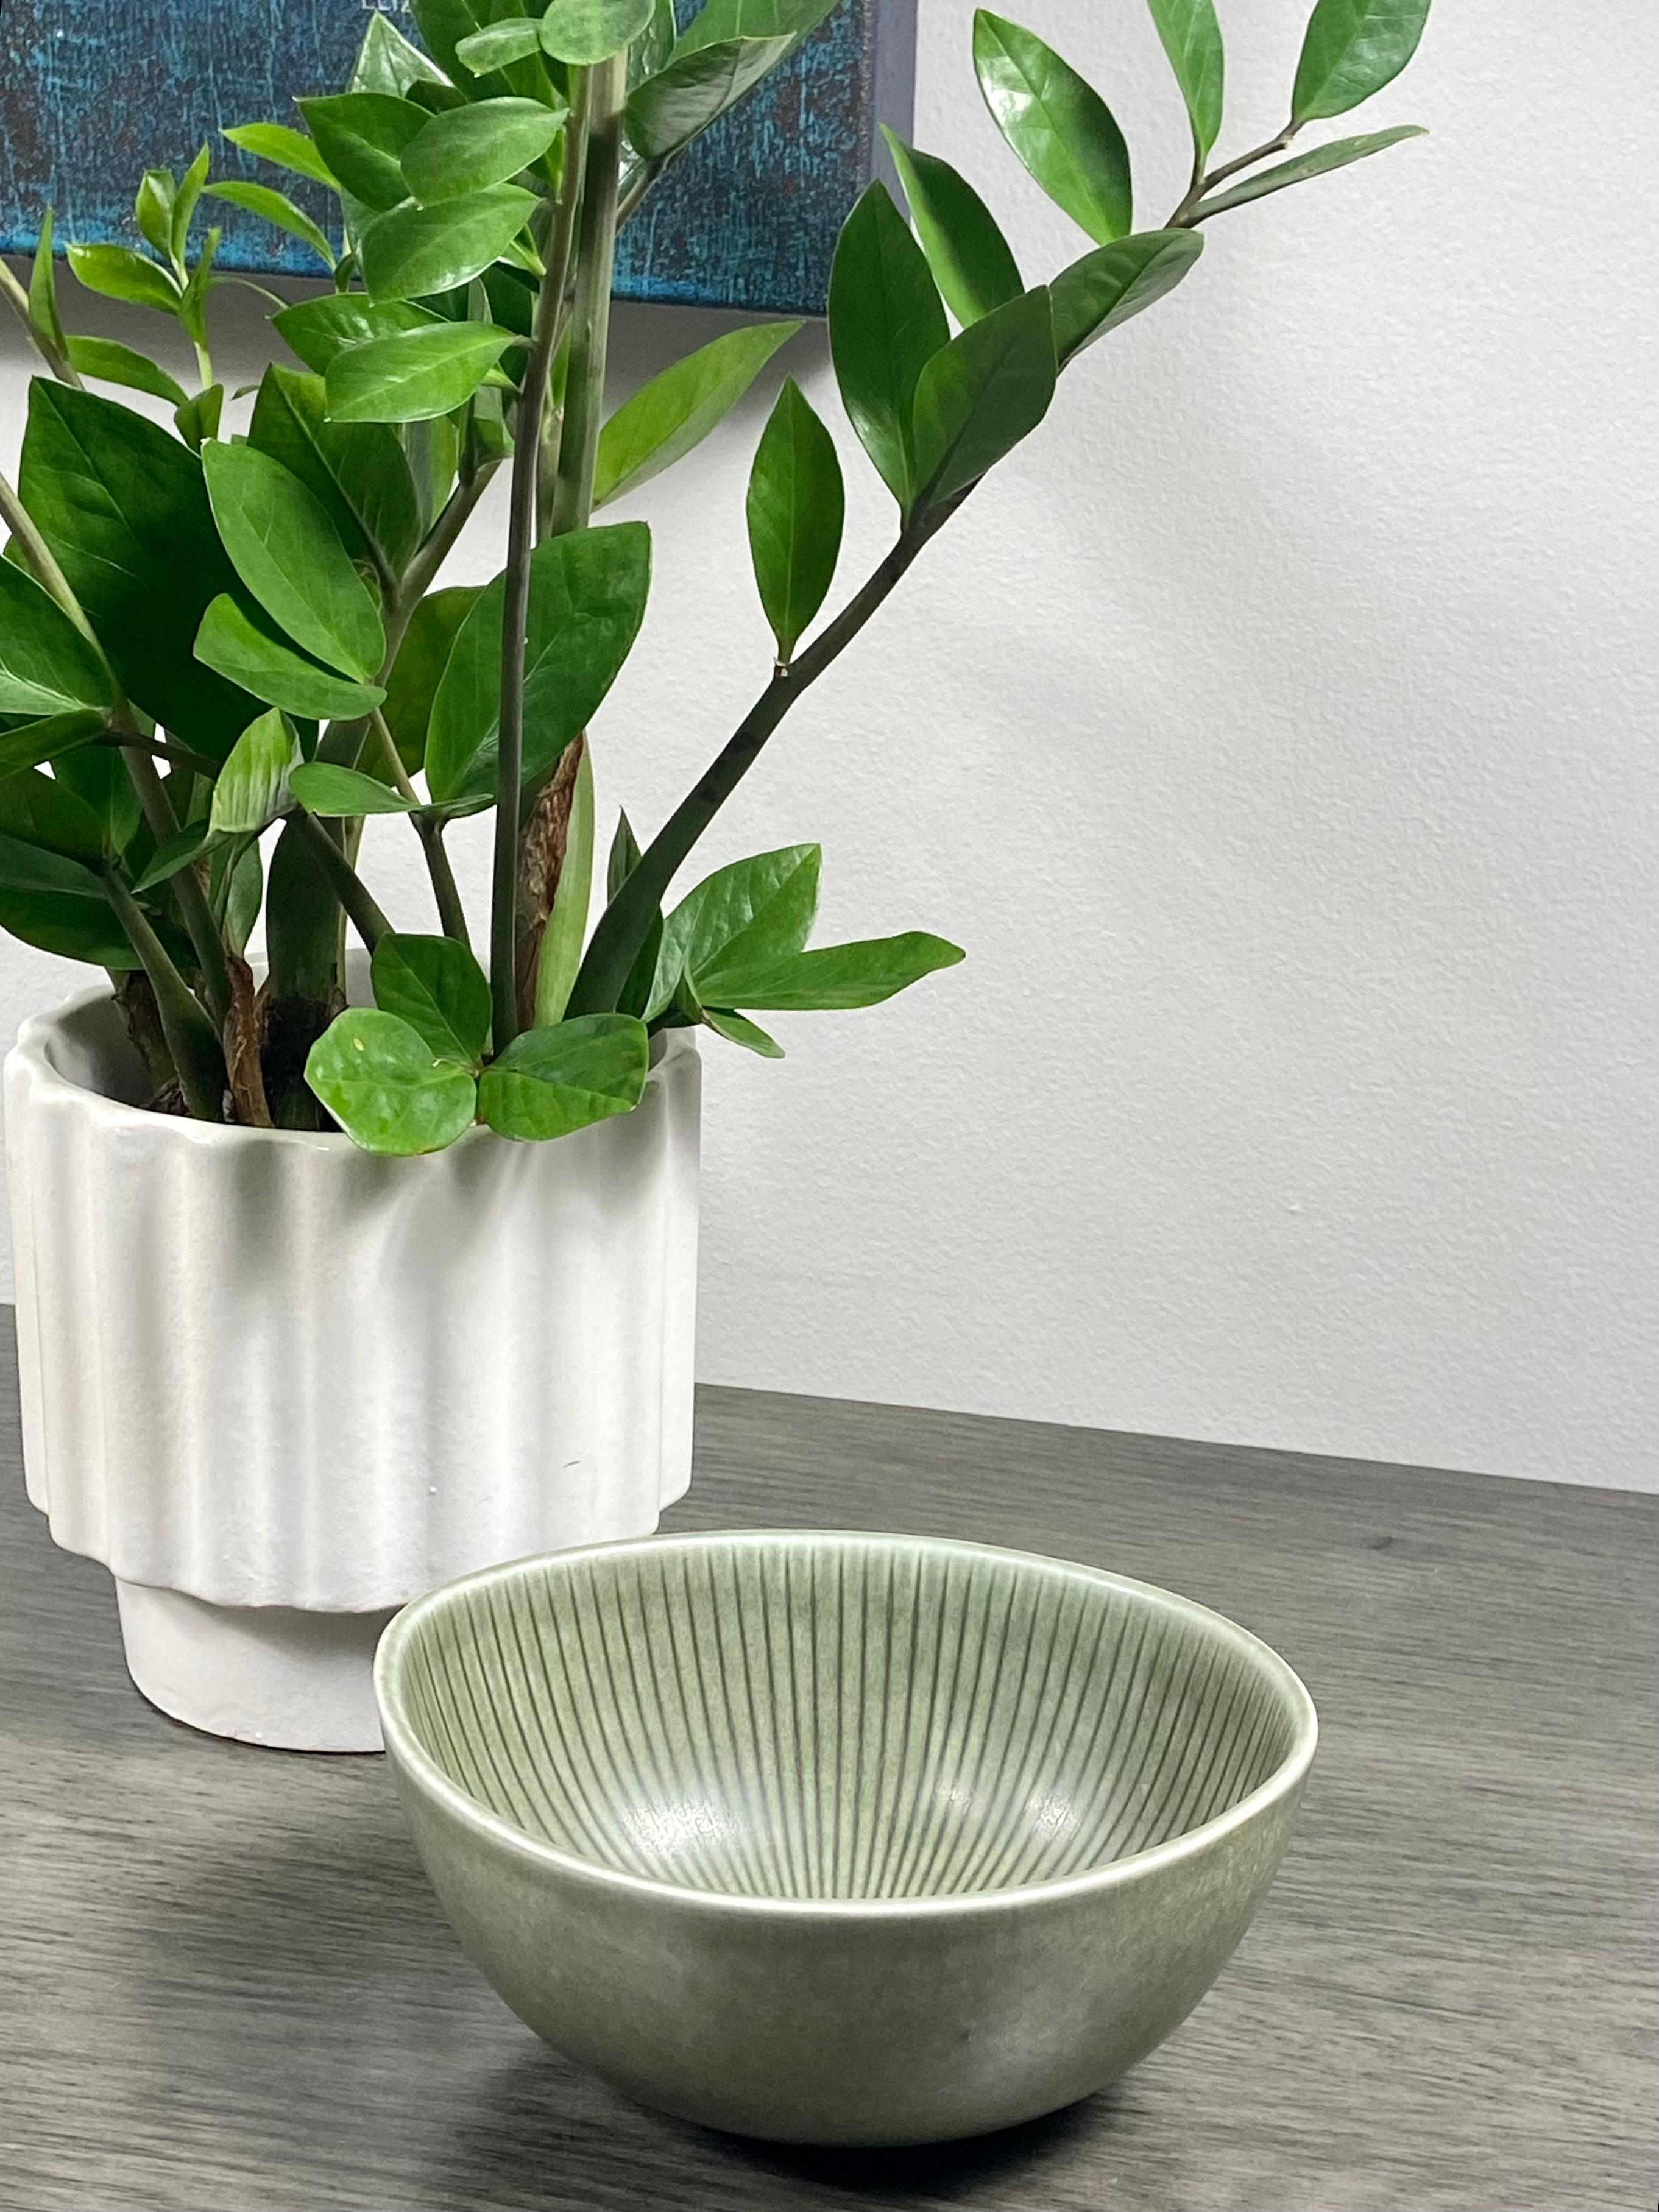 A light sage glazed Midcentury bowl by Gunnar Nylund for Rorstrand. This bowl has a nicely incised interior with contrasting shades of green. It was made in the 50's by one of Sweden's premier Midcentury ceramists. It's part of the Ritzi collection